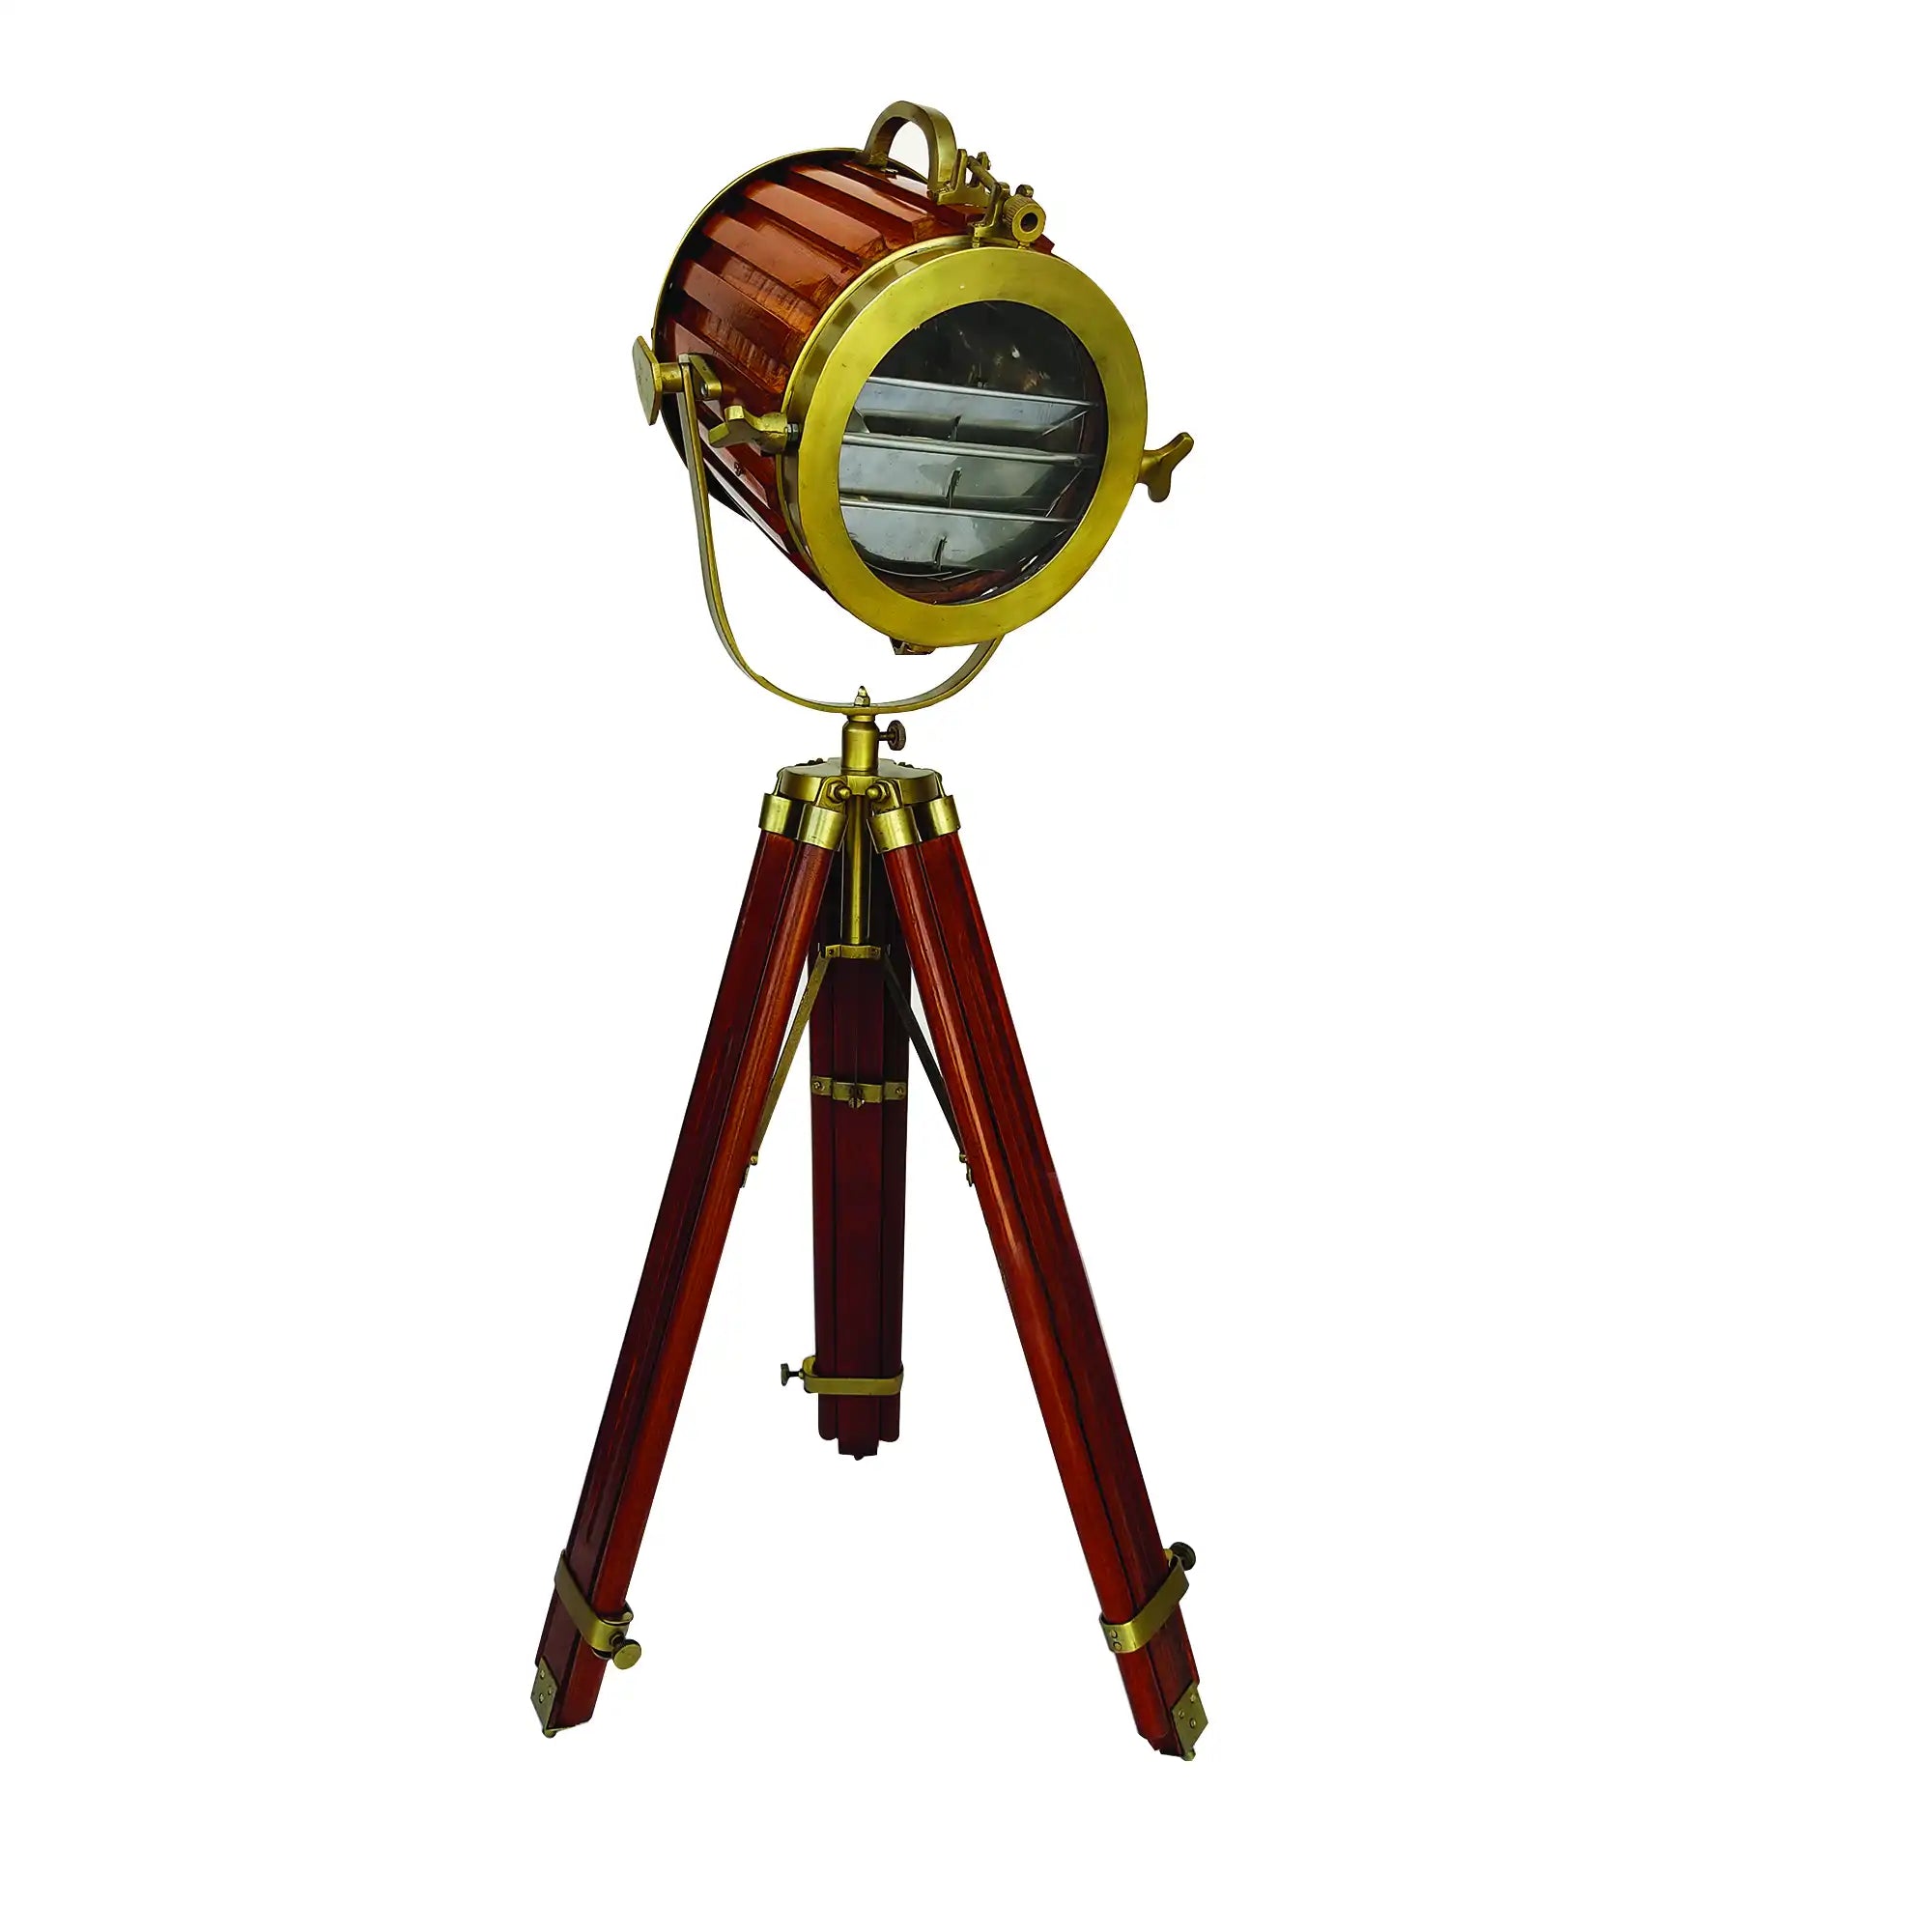 Hollywood wooden spotlight searchlight floor lamp with brown wooden tripod stand Home & Office Decor